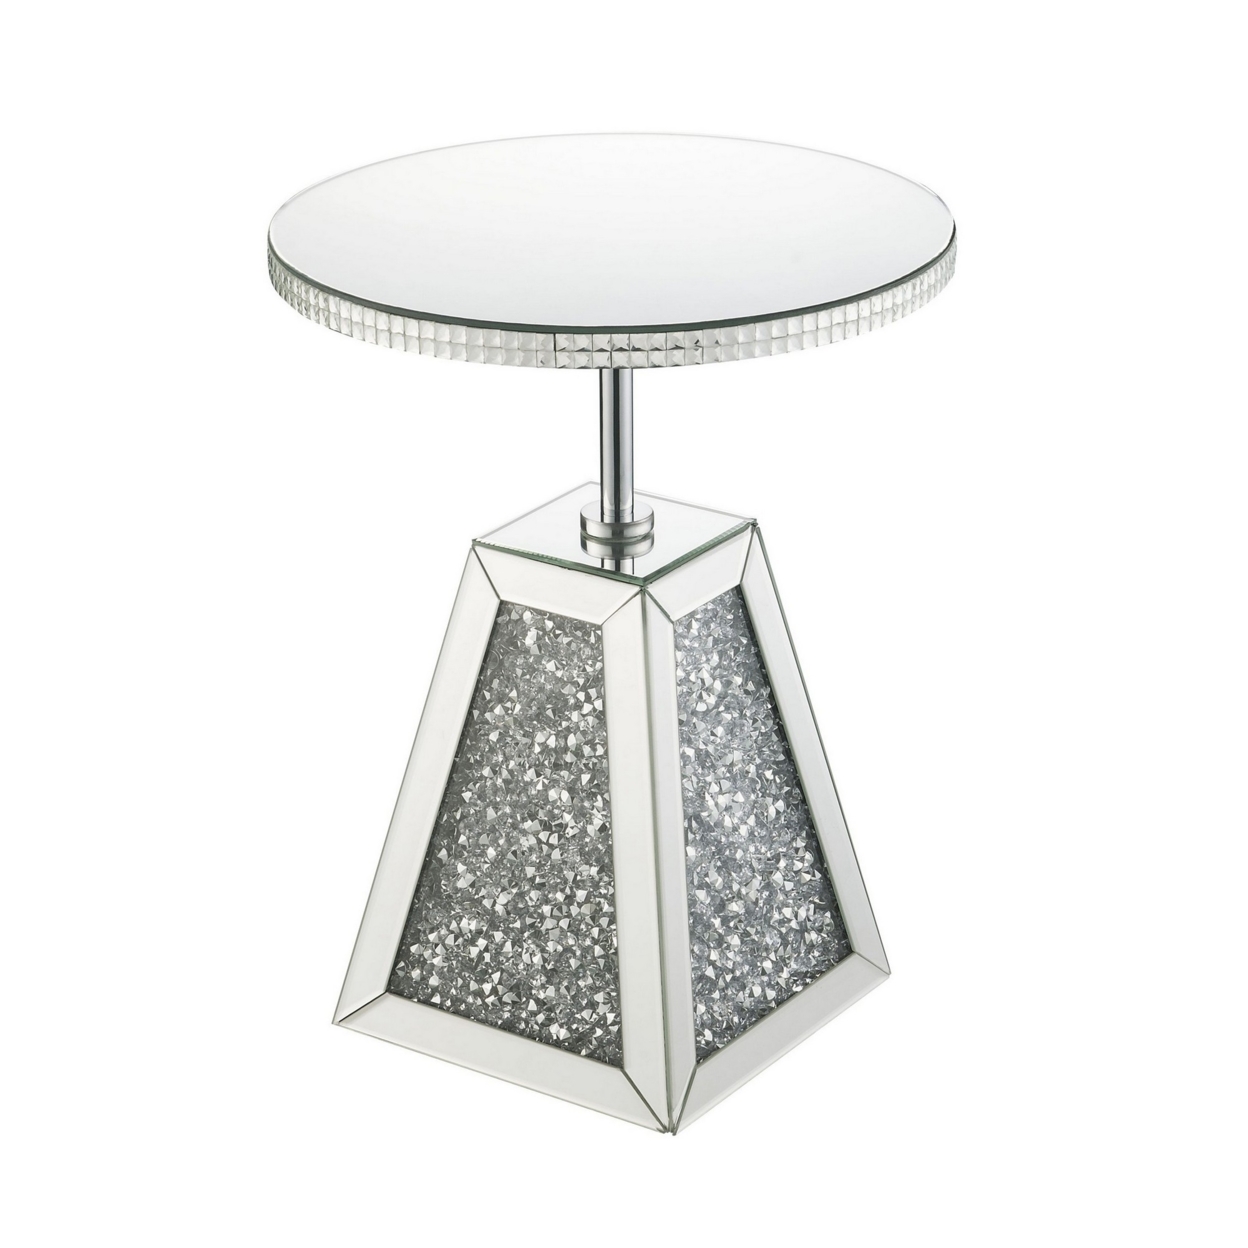 Round Mirrored Accent Table With Pedestal Base And Glass Top, Silver- Saltoro Sherpi